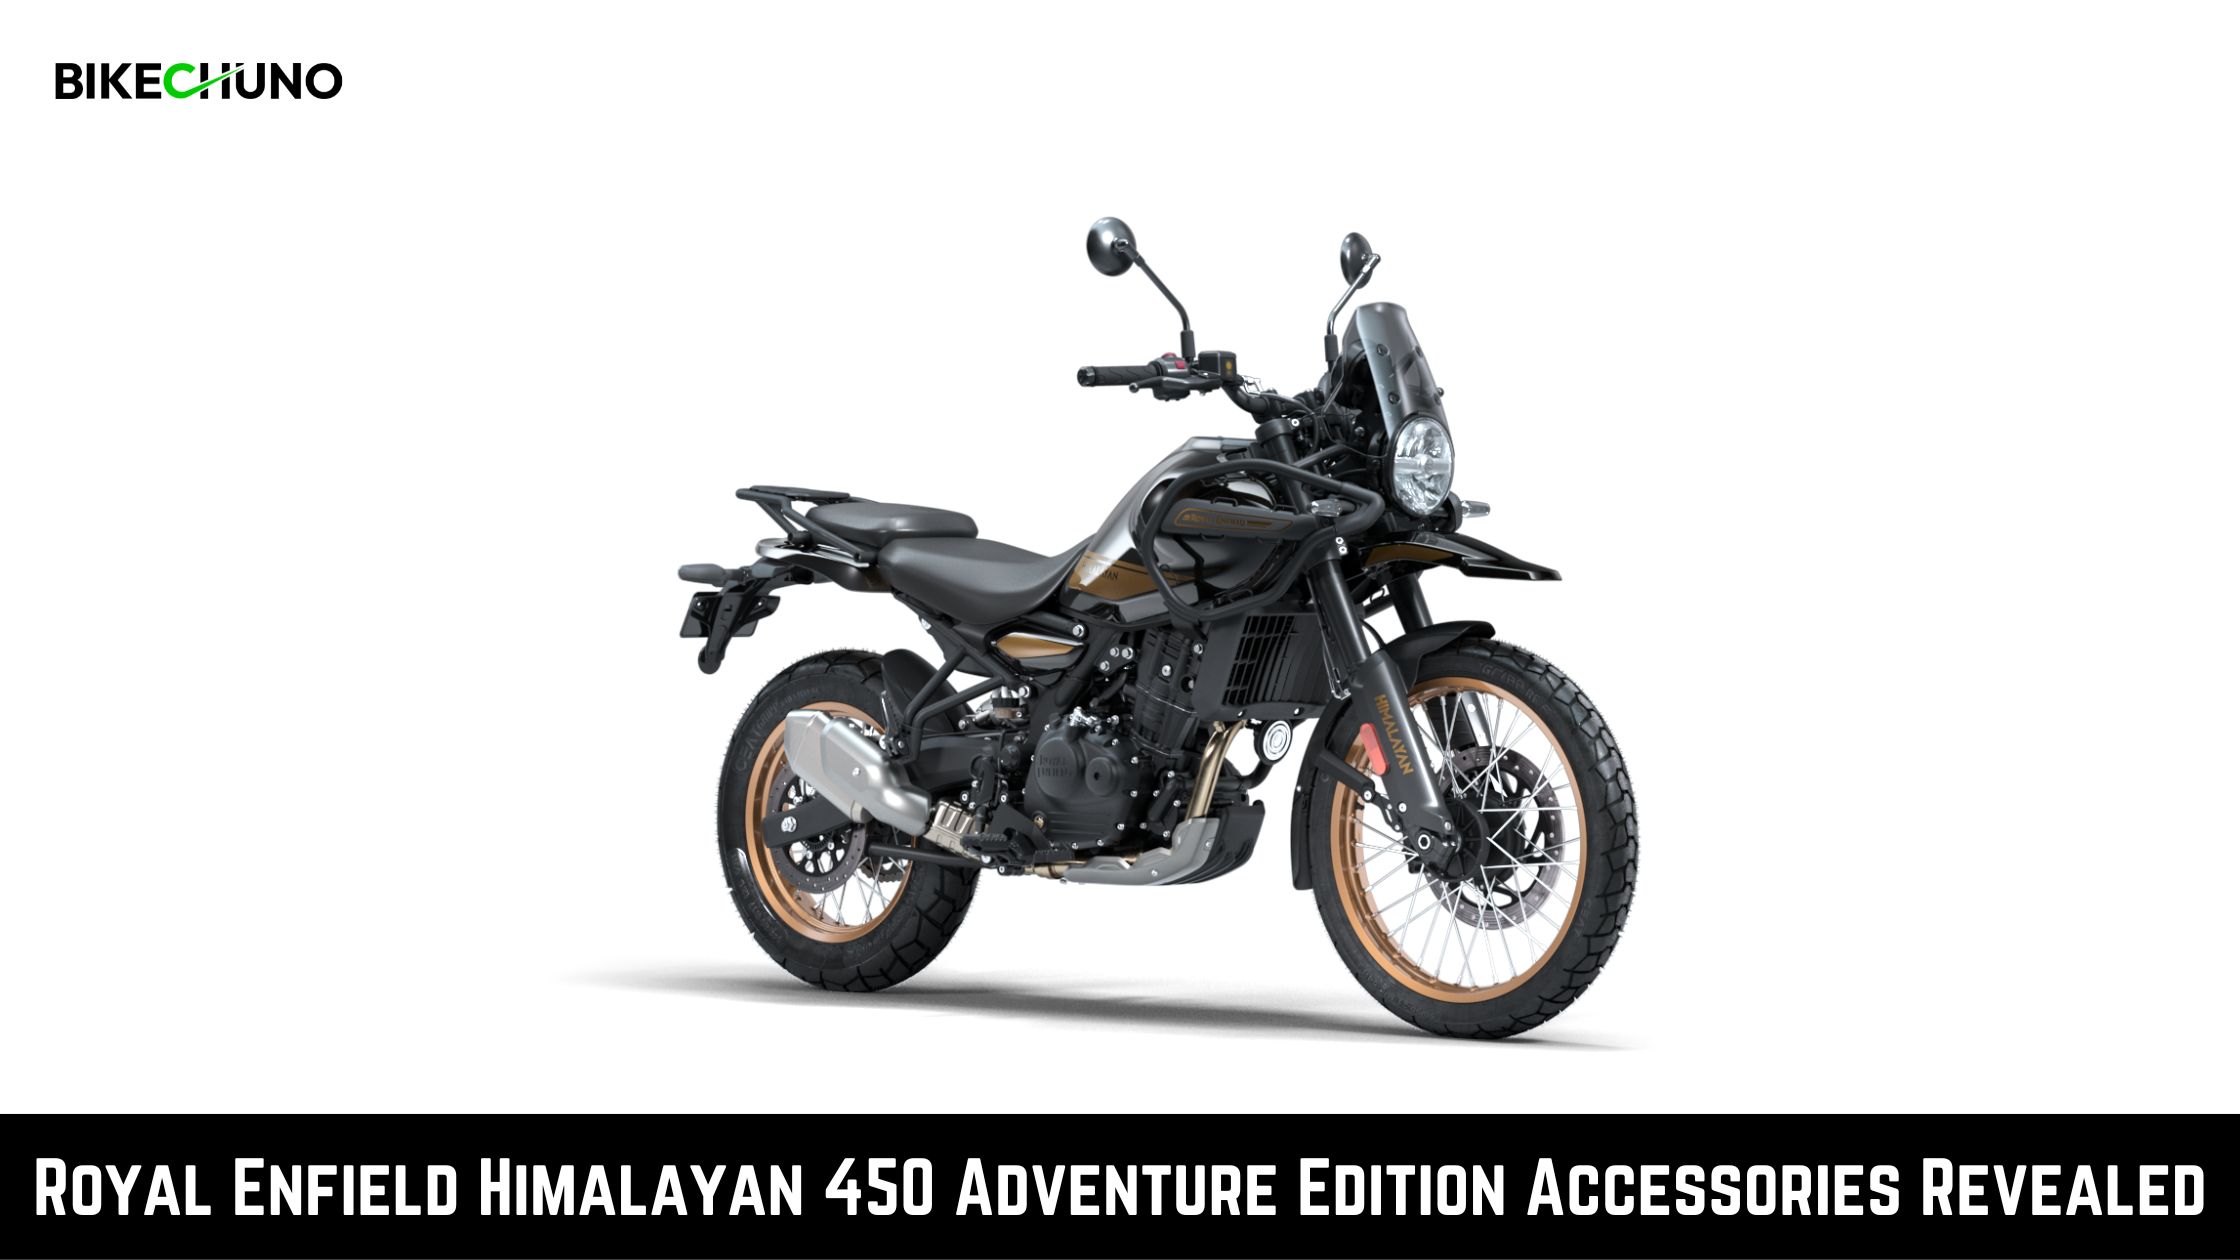 Royal Enfield Himalayan 450 Adventure Edition Accessories Revealed